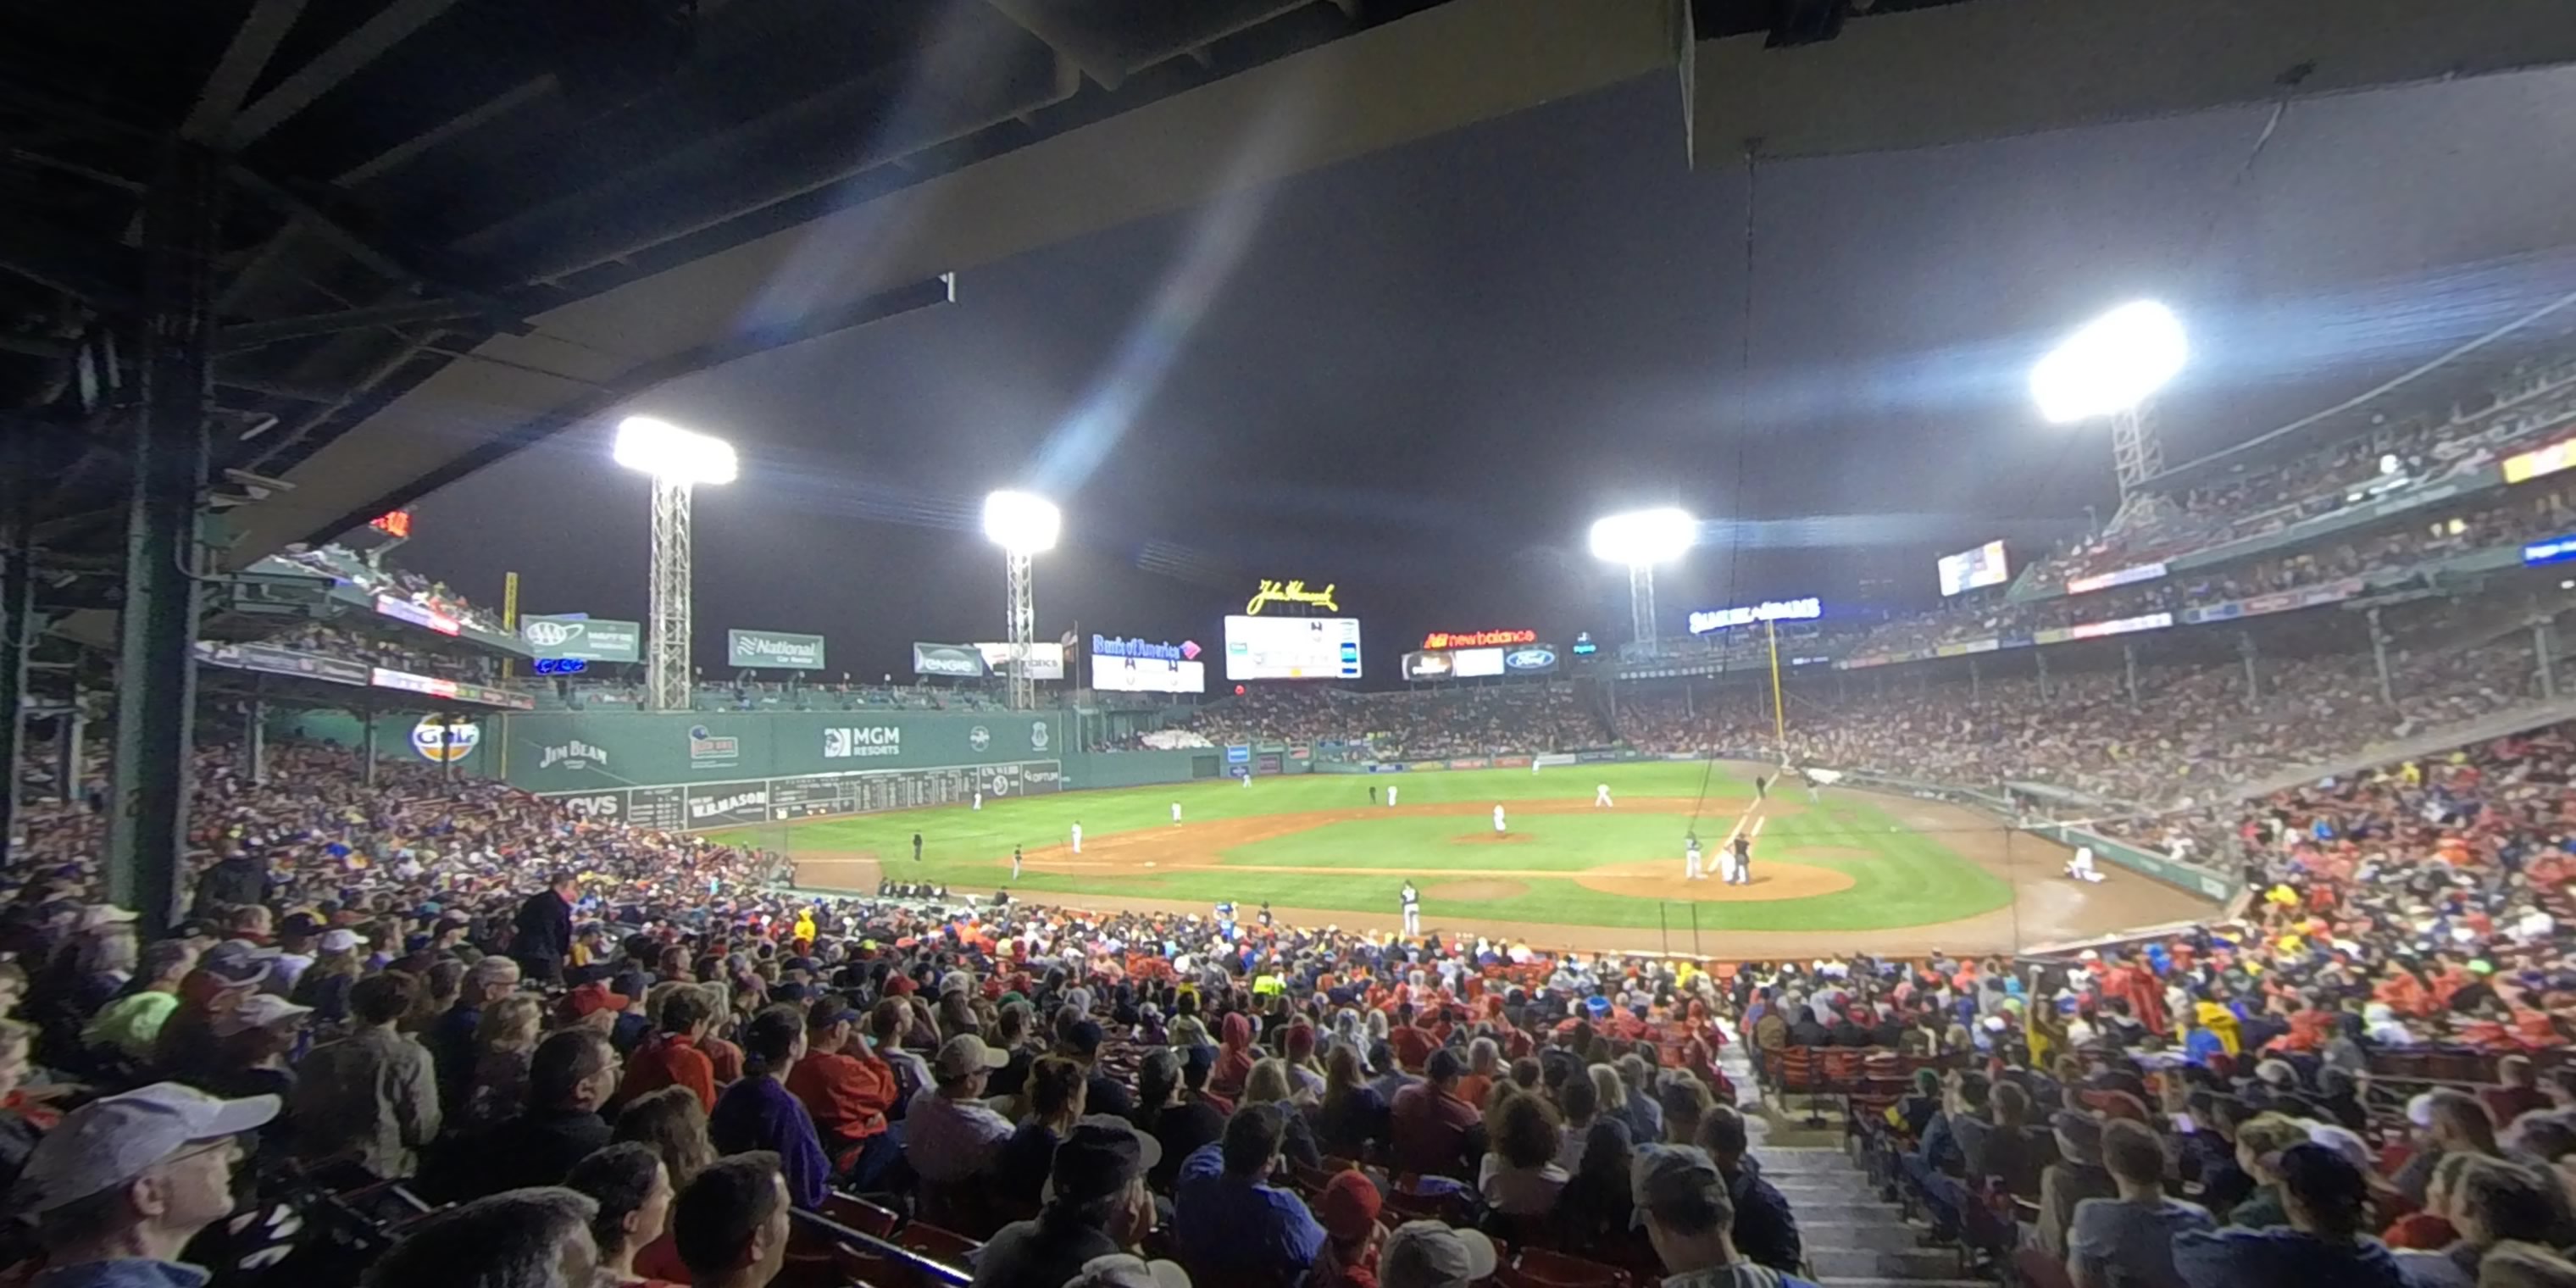 grandstand 23 panoramic seat view  for baseball - fenway park